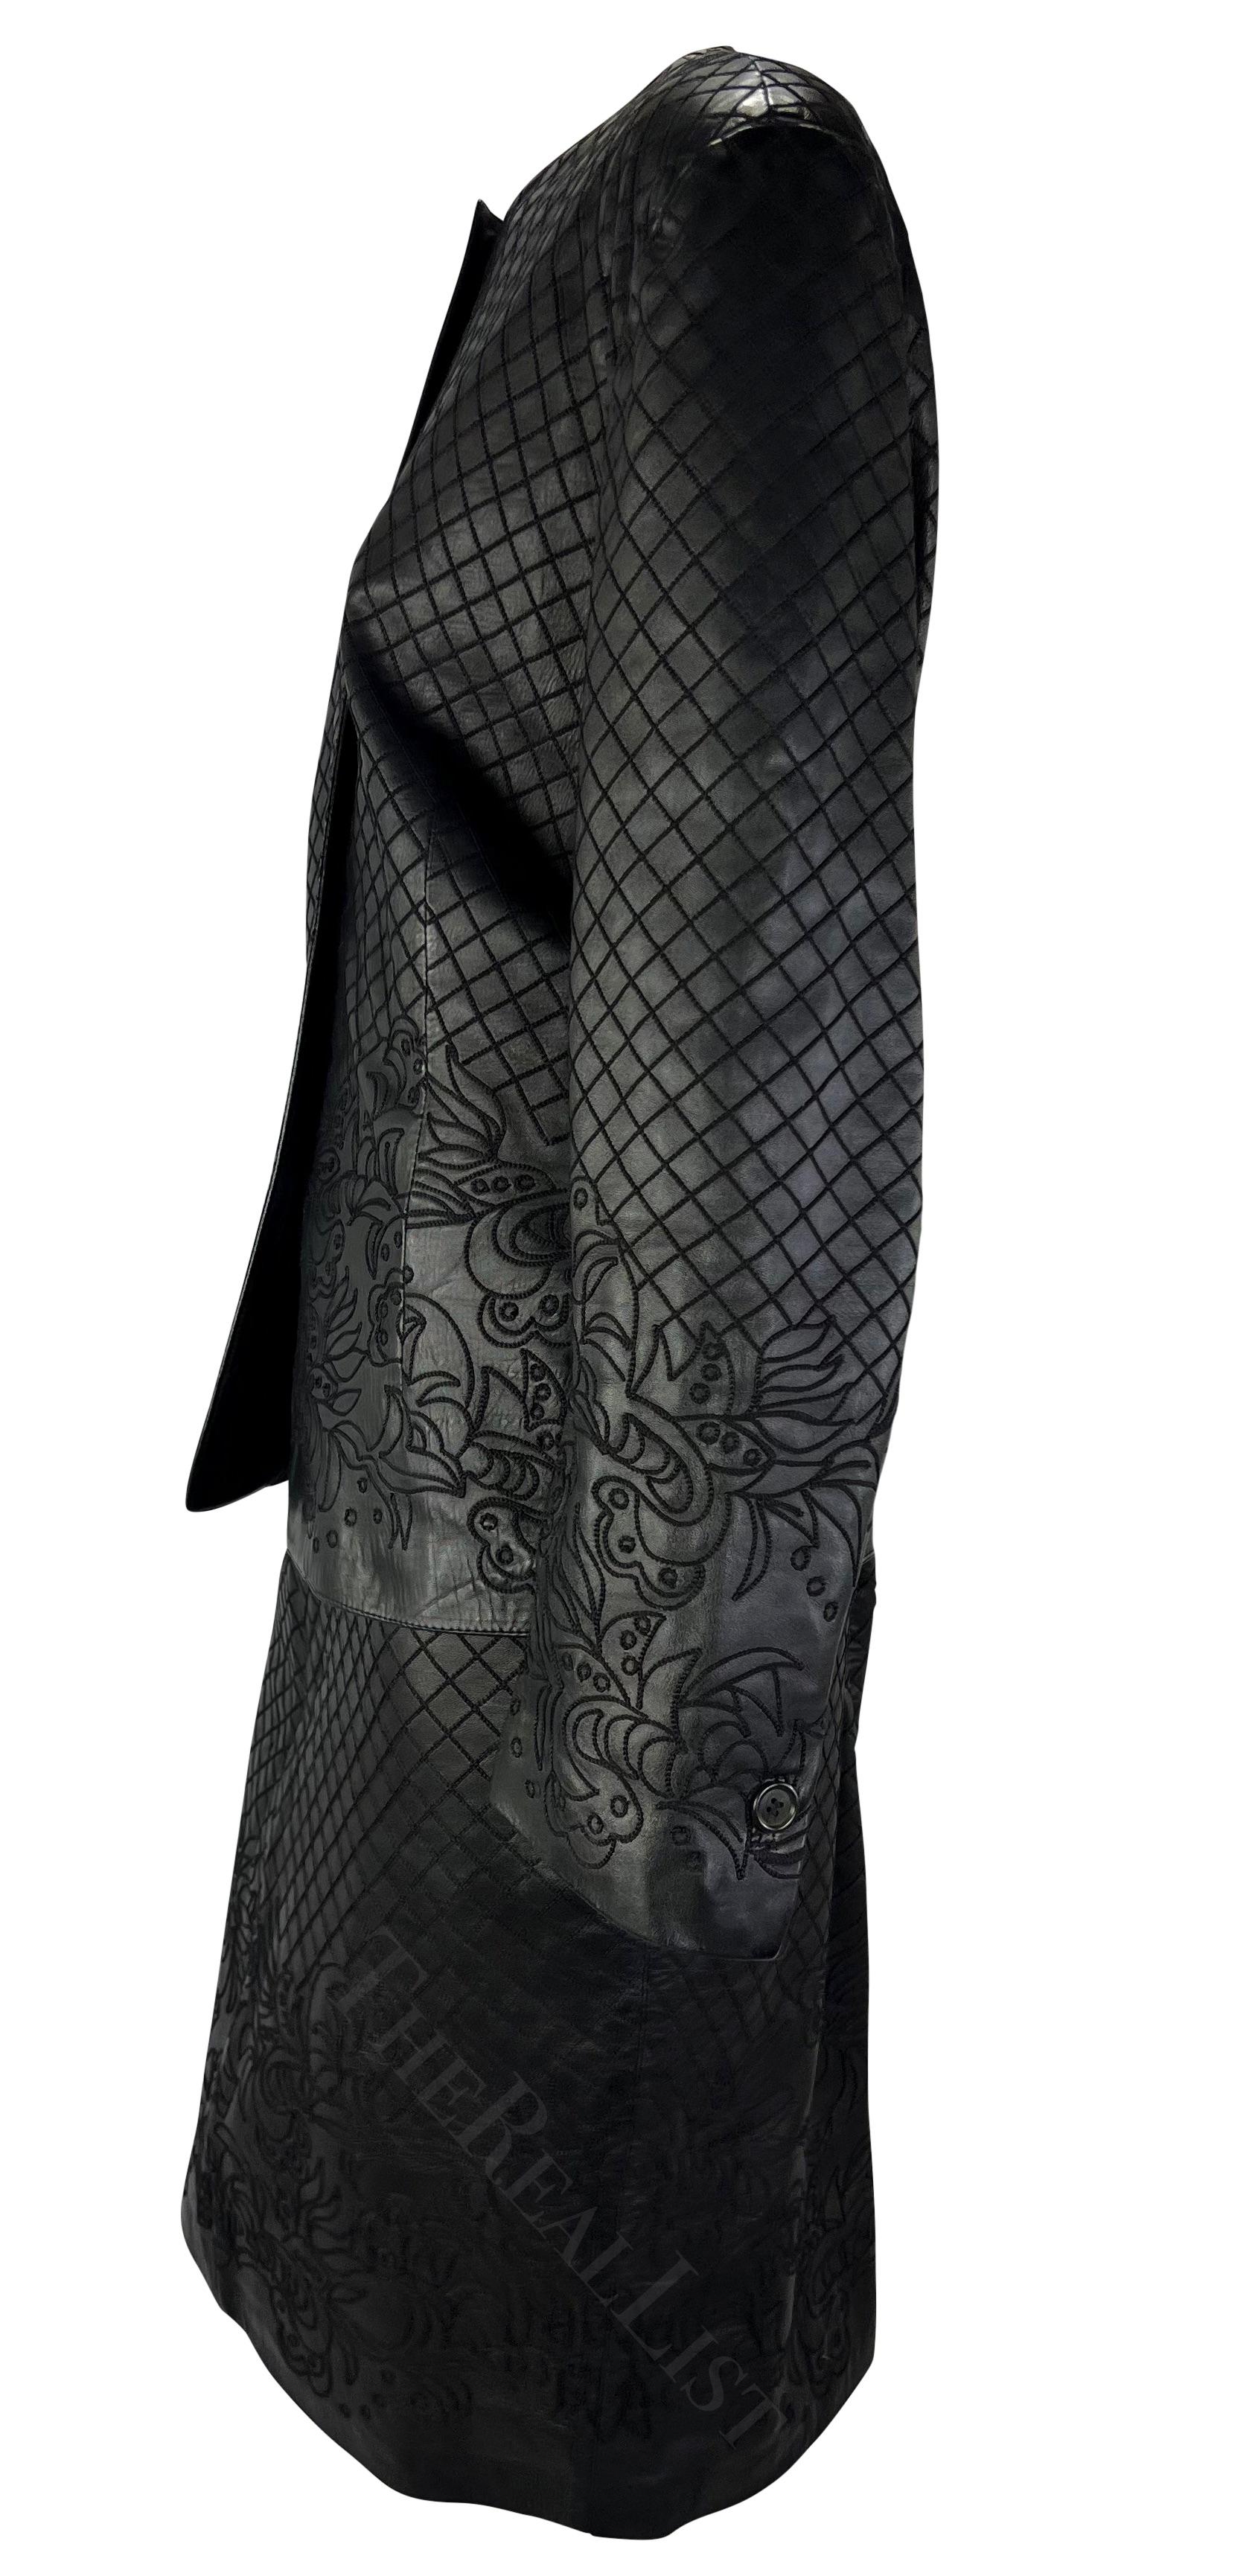 Women's F/W 1986 Gianni Versace Runway Black Leather Embroidered Floral Skirt Set For Sale